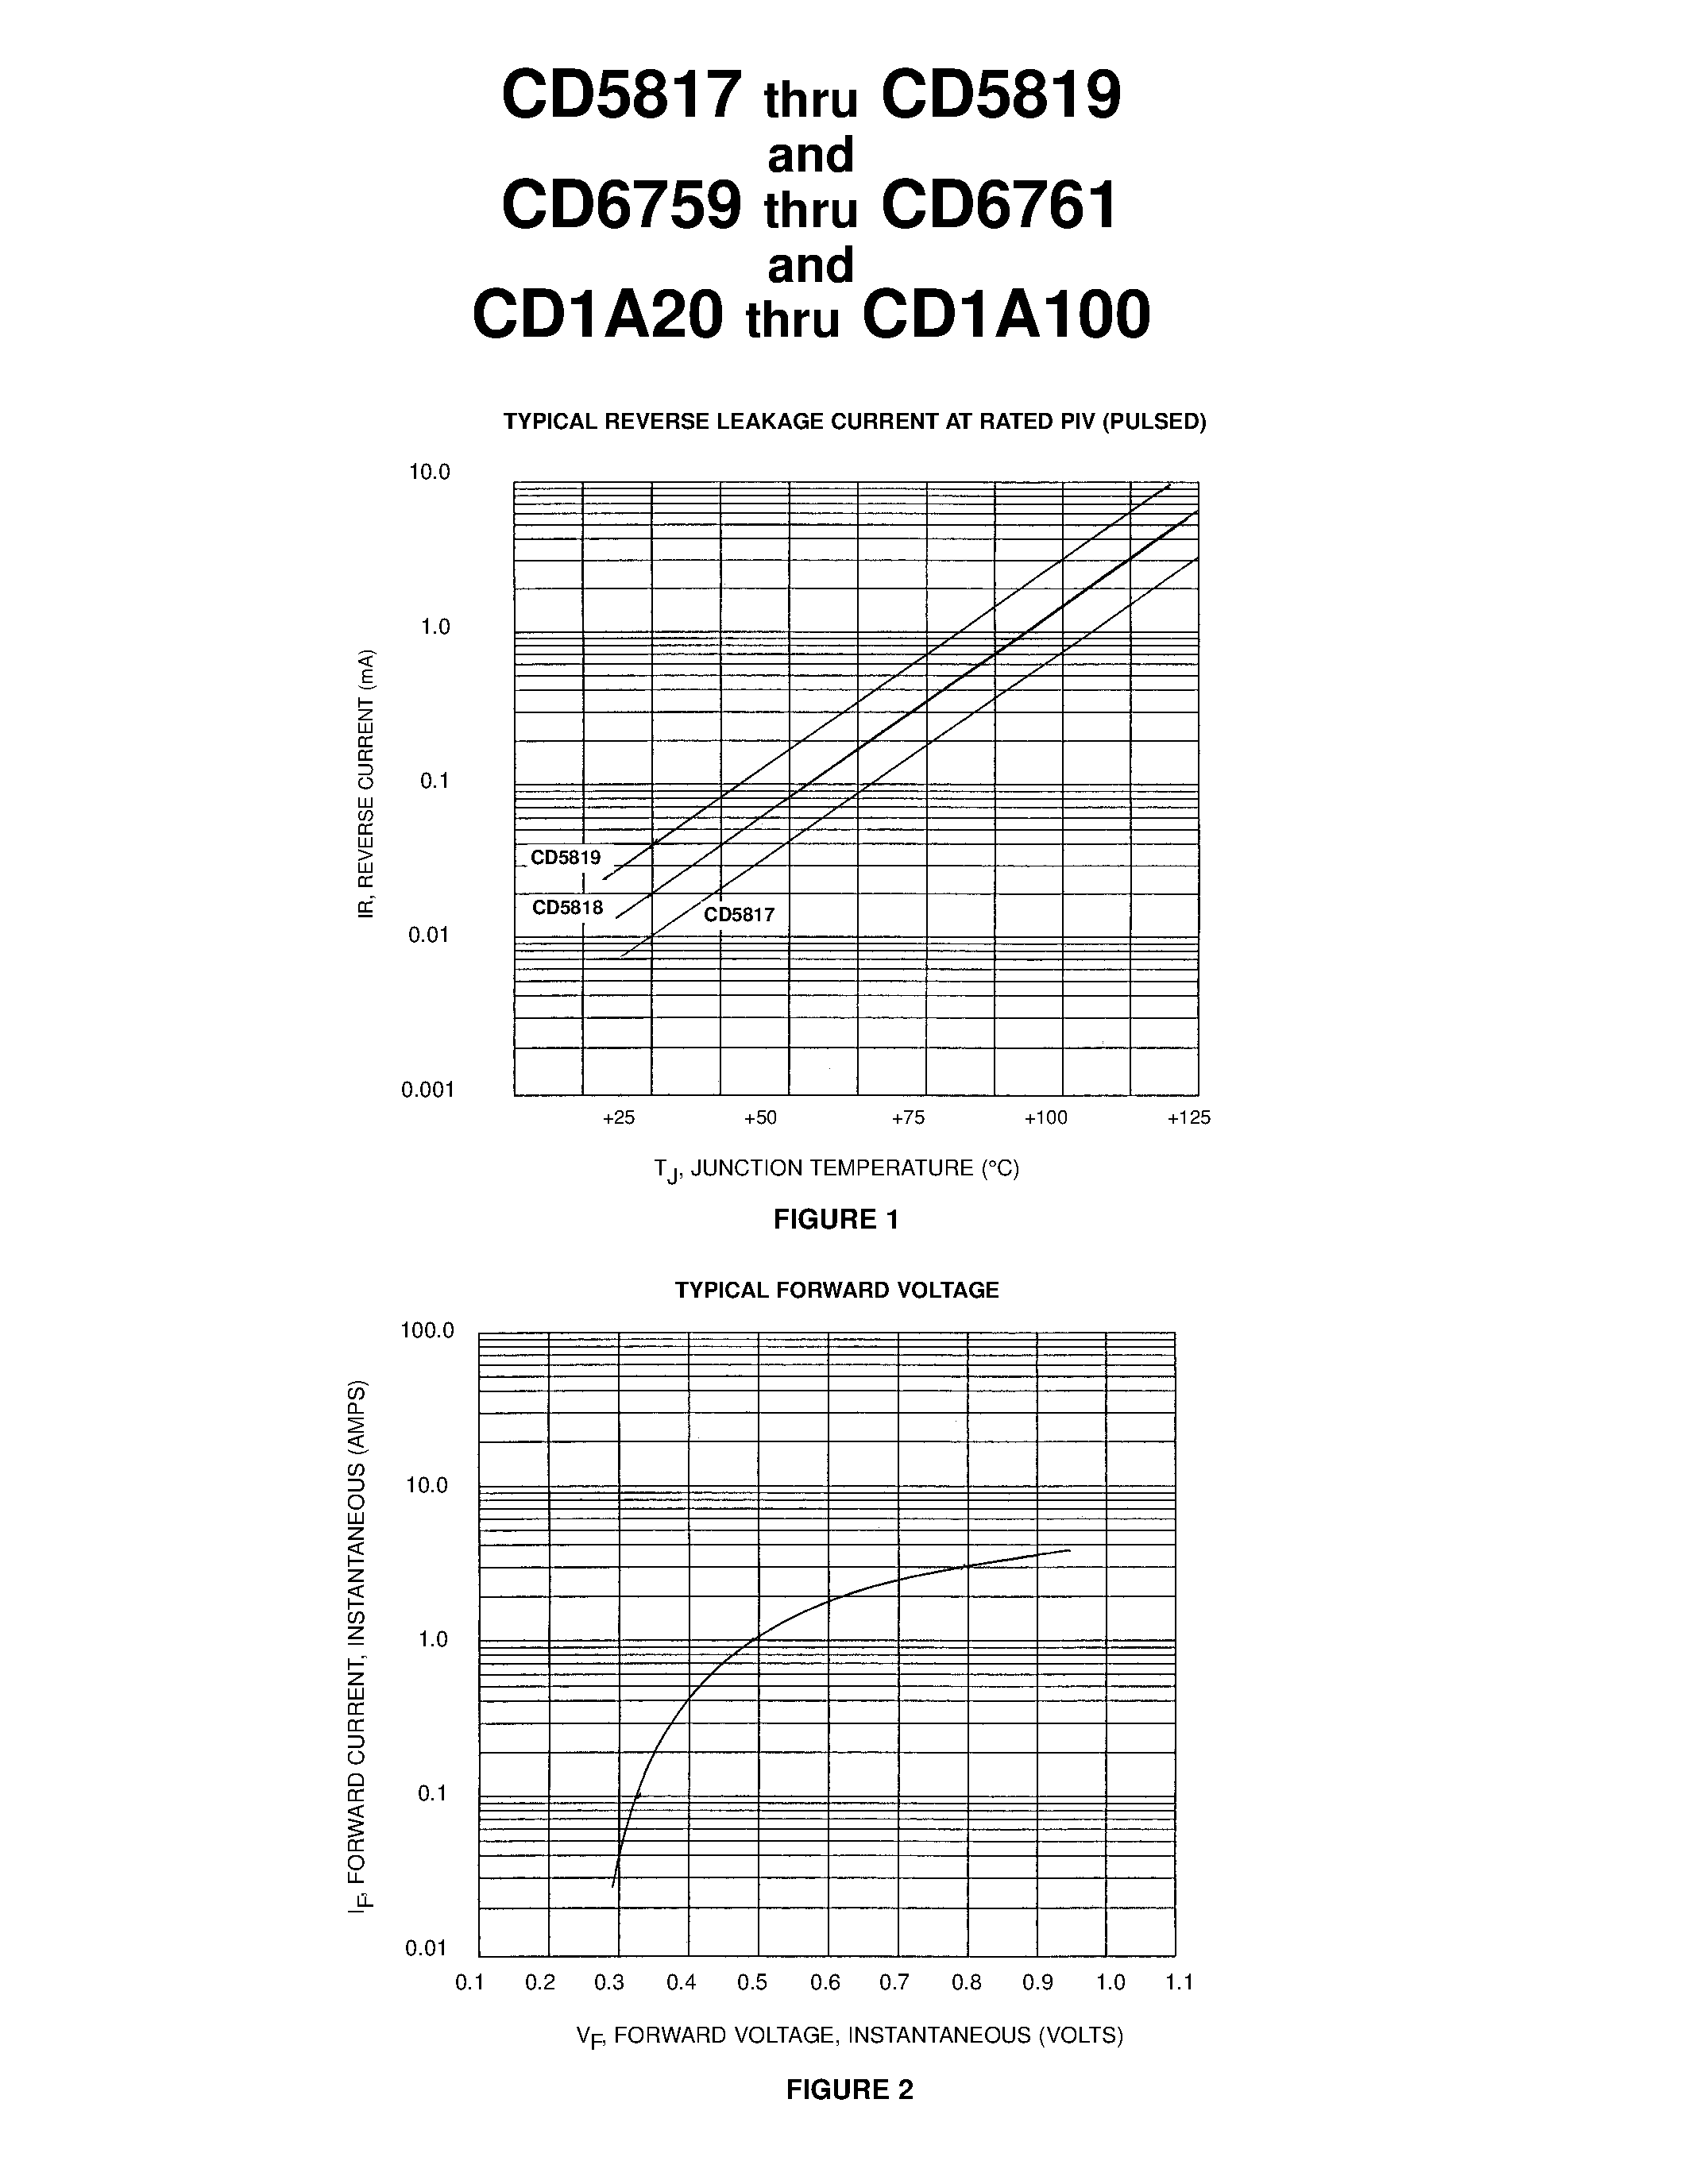 Datasheet CD1A100 - 1 AMP SCHOTTKY BARRIER RECTIFIER CHIPS page 2